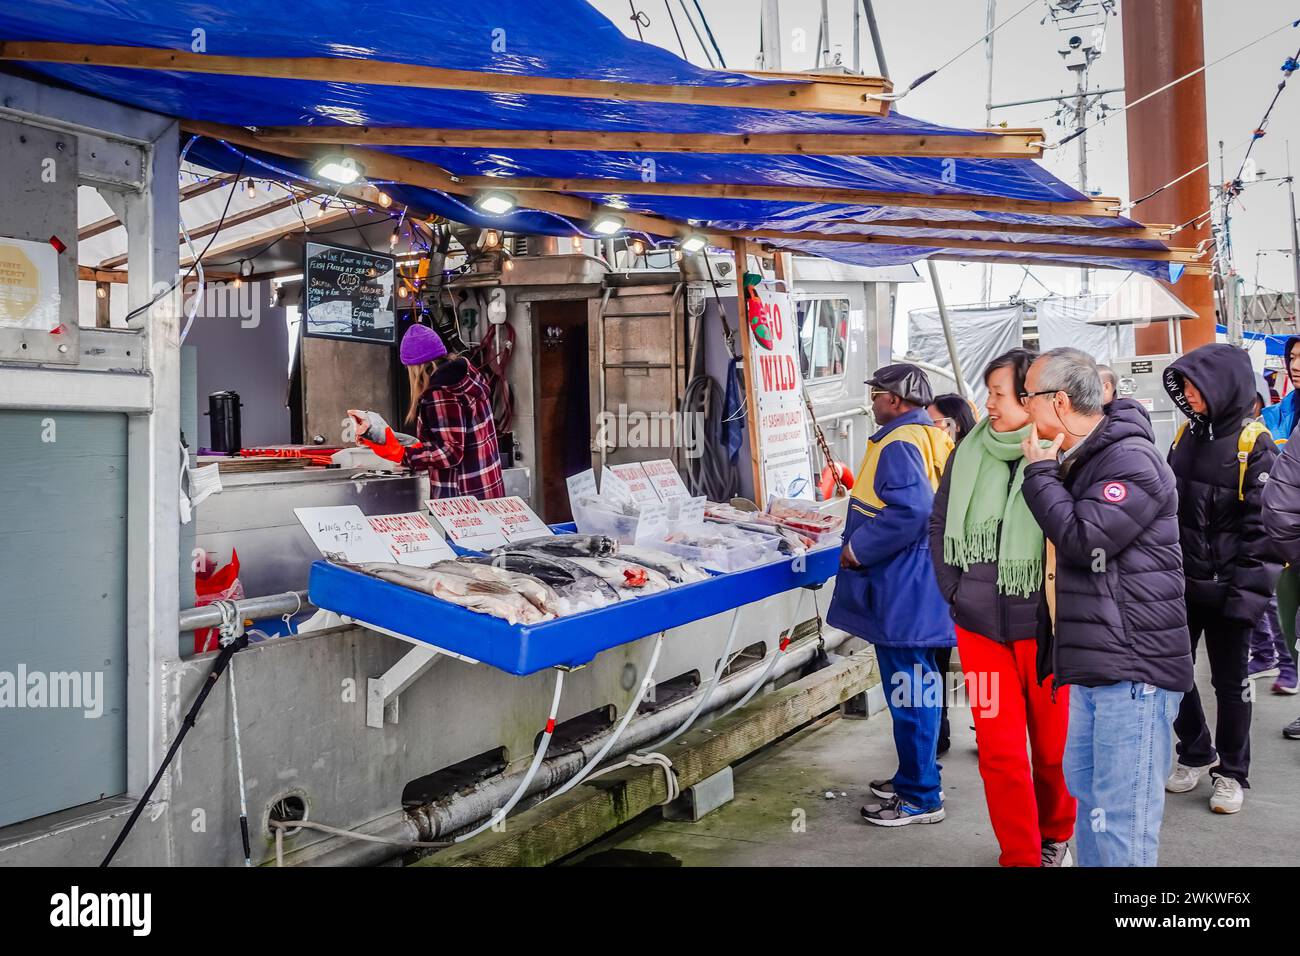 Seafood vendors on fish boats at Steveston Fish Market in Vancouver Stock Photo